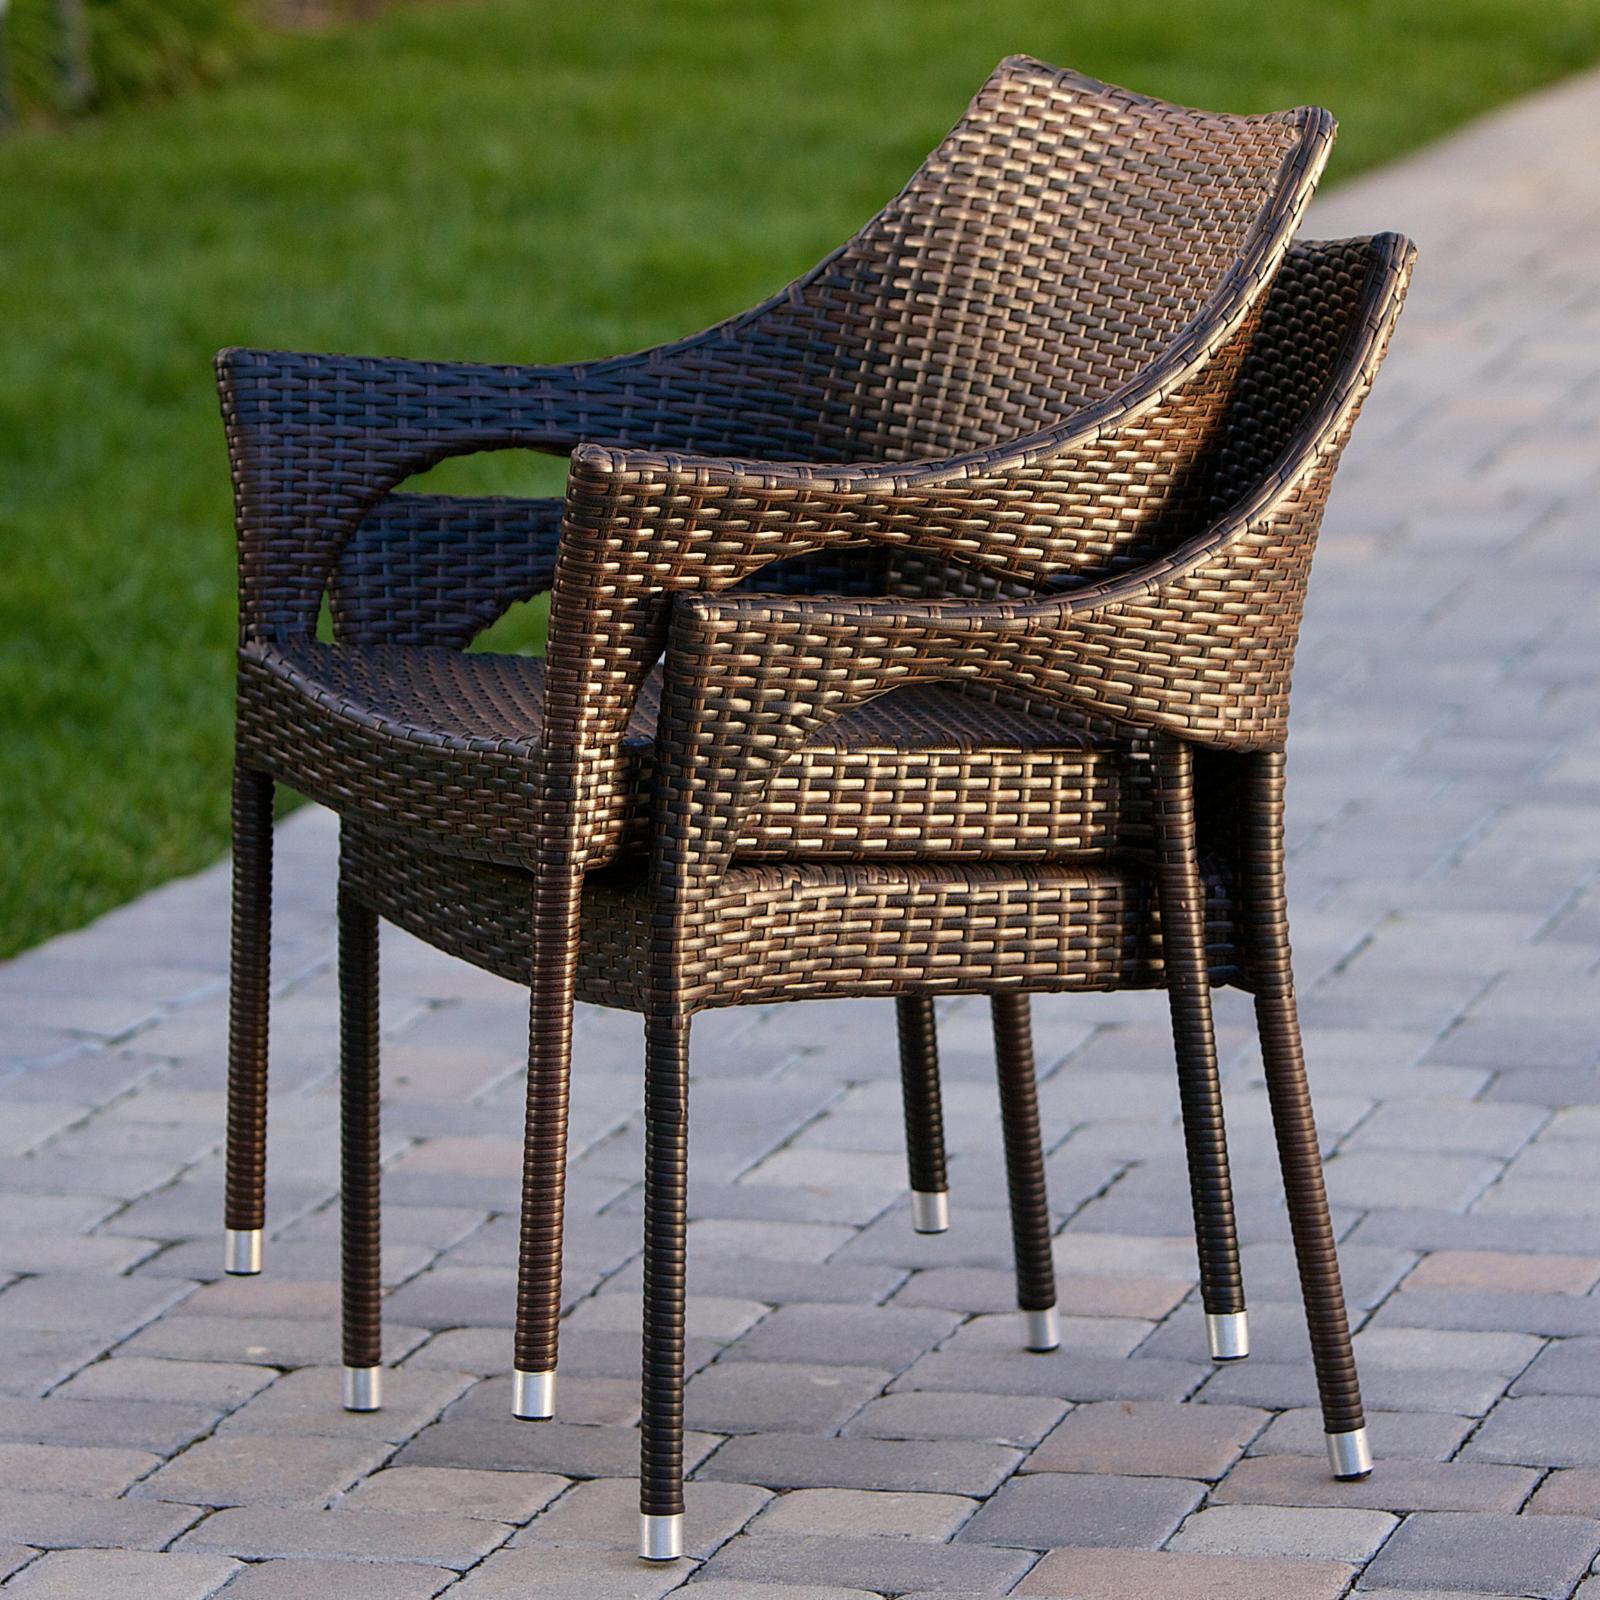 Cliff All-Weather Wicker Patio Dining Set - Seats 6 - image 3 of 10